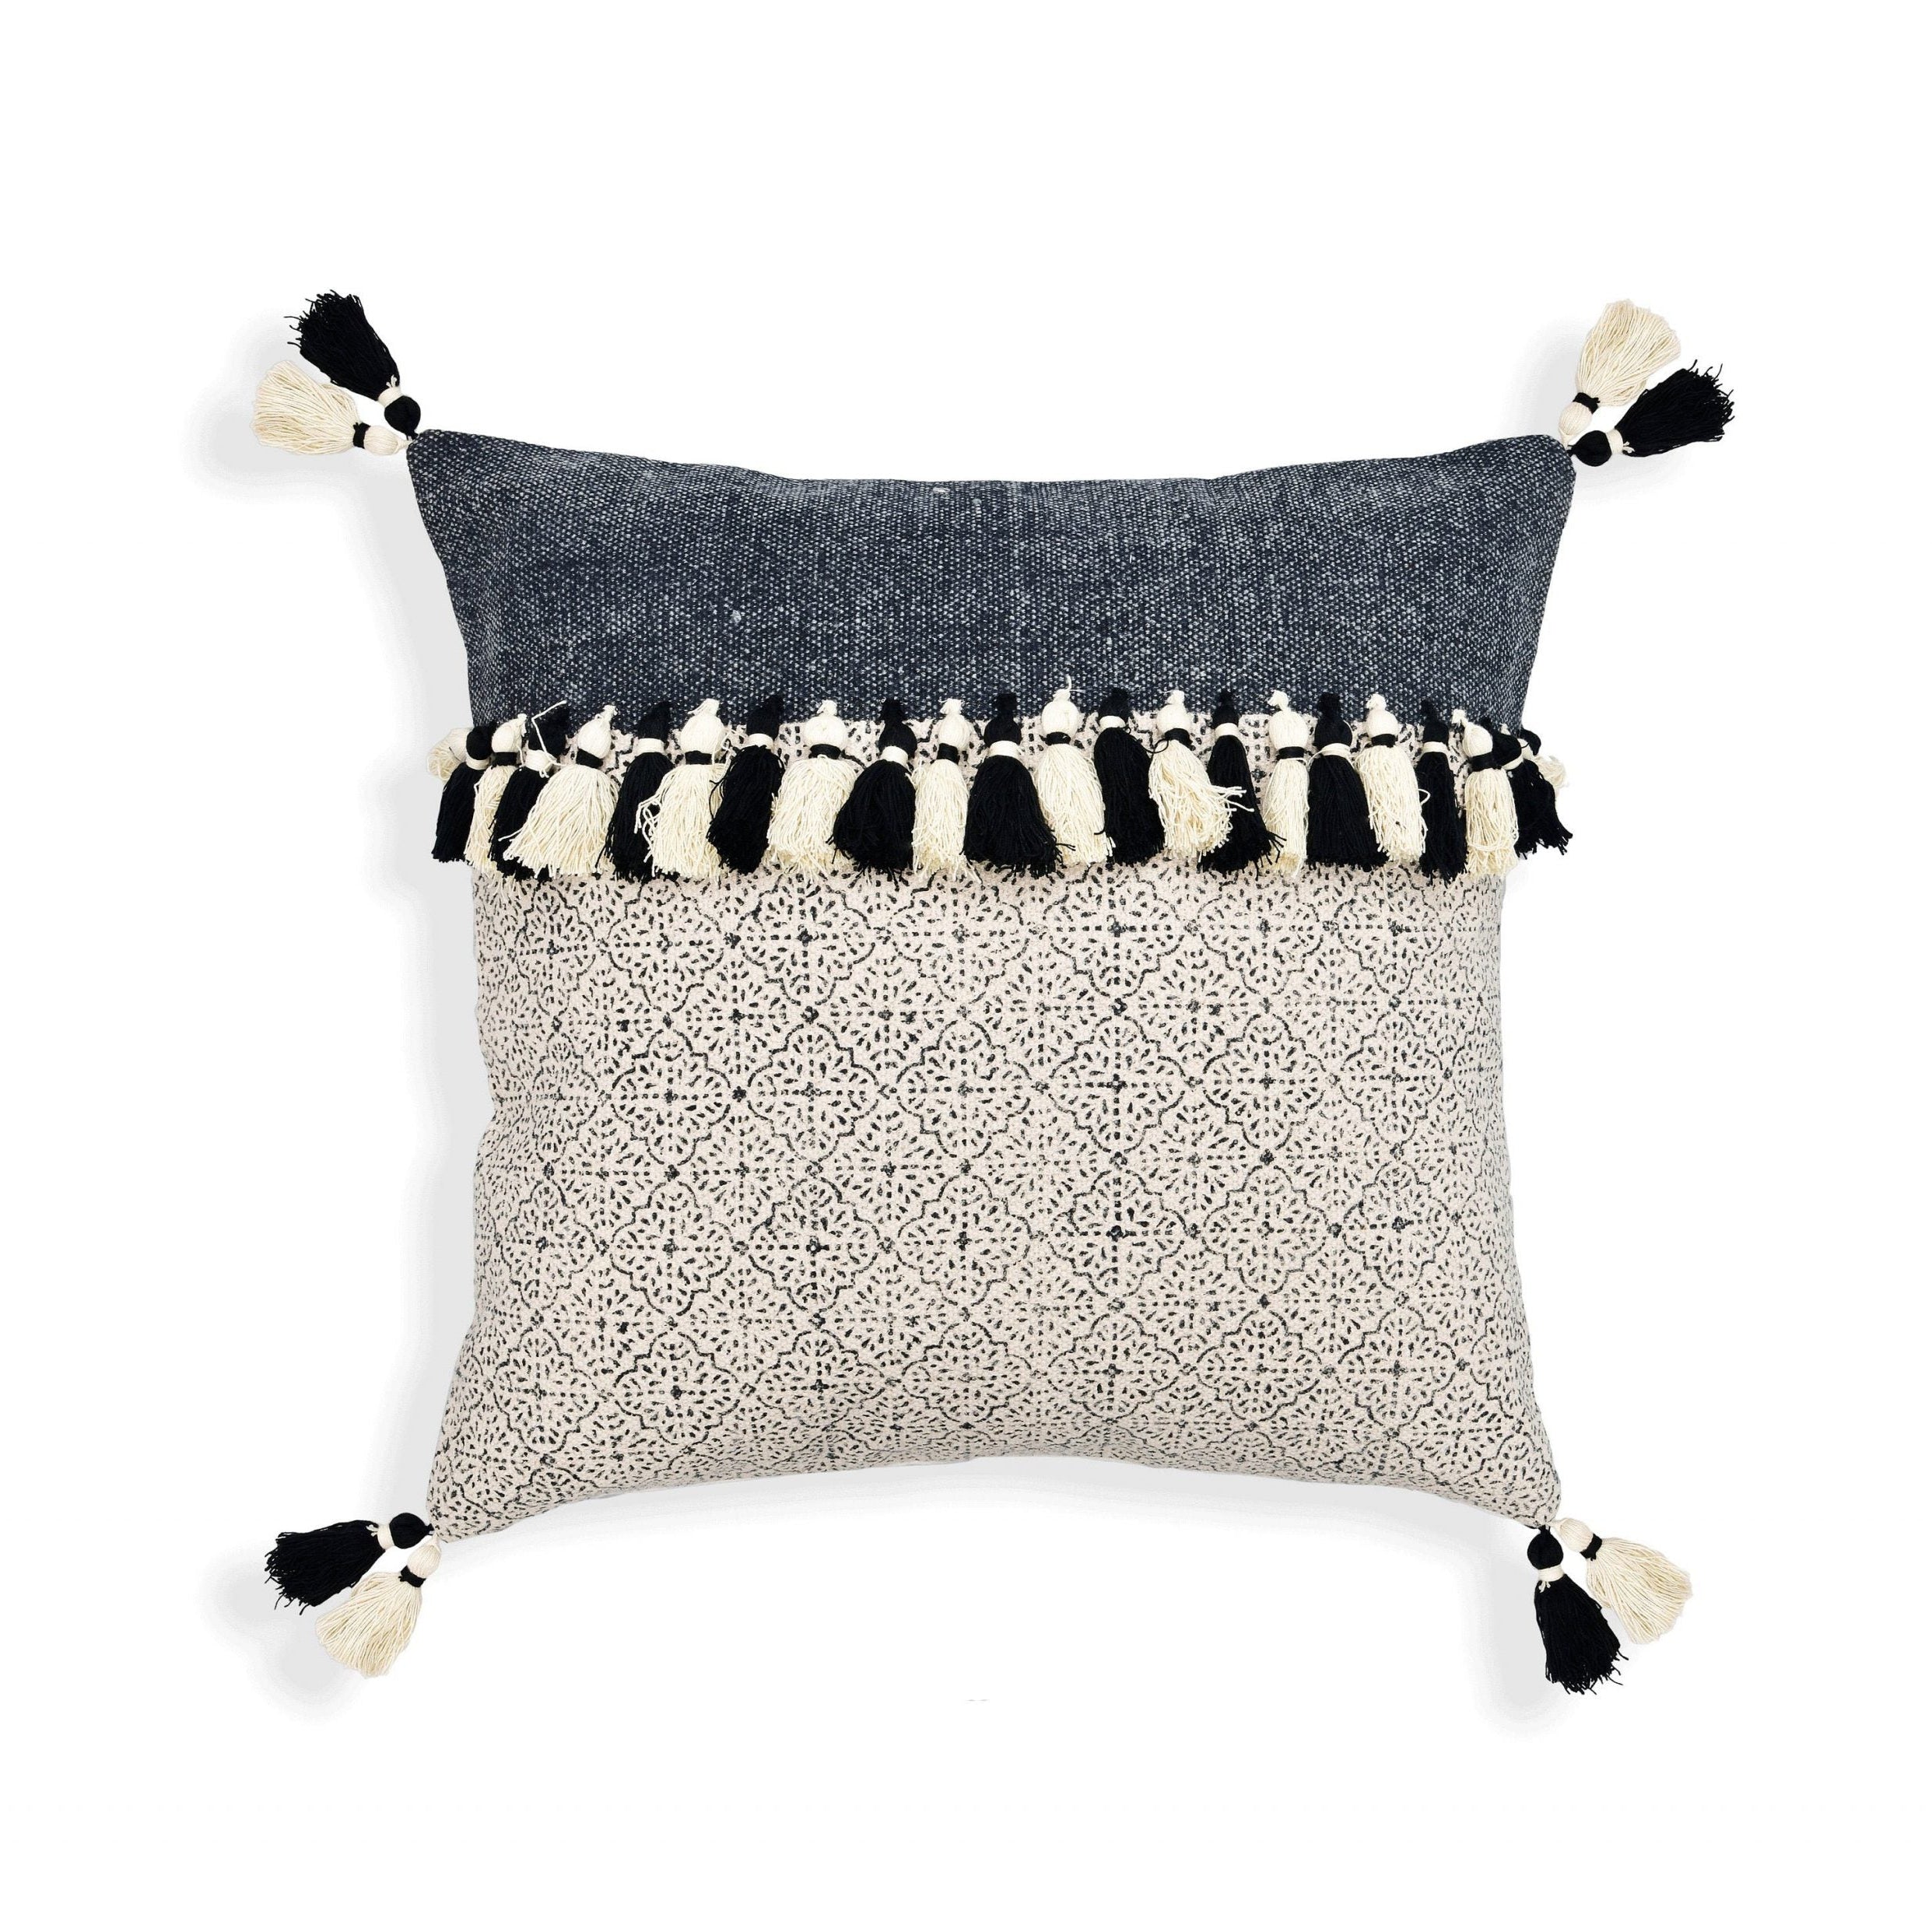 'Textures & Tassels' 100% Cotton Berber Style Cushion Cover